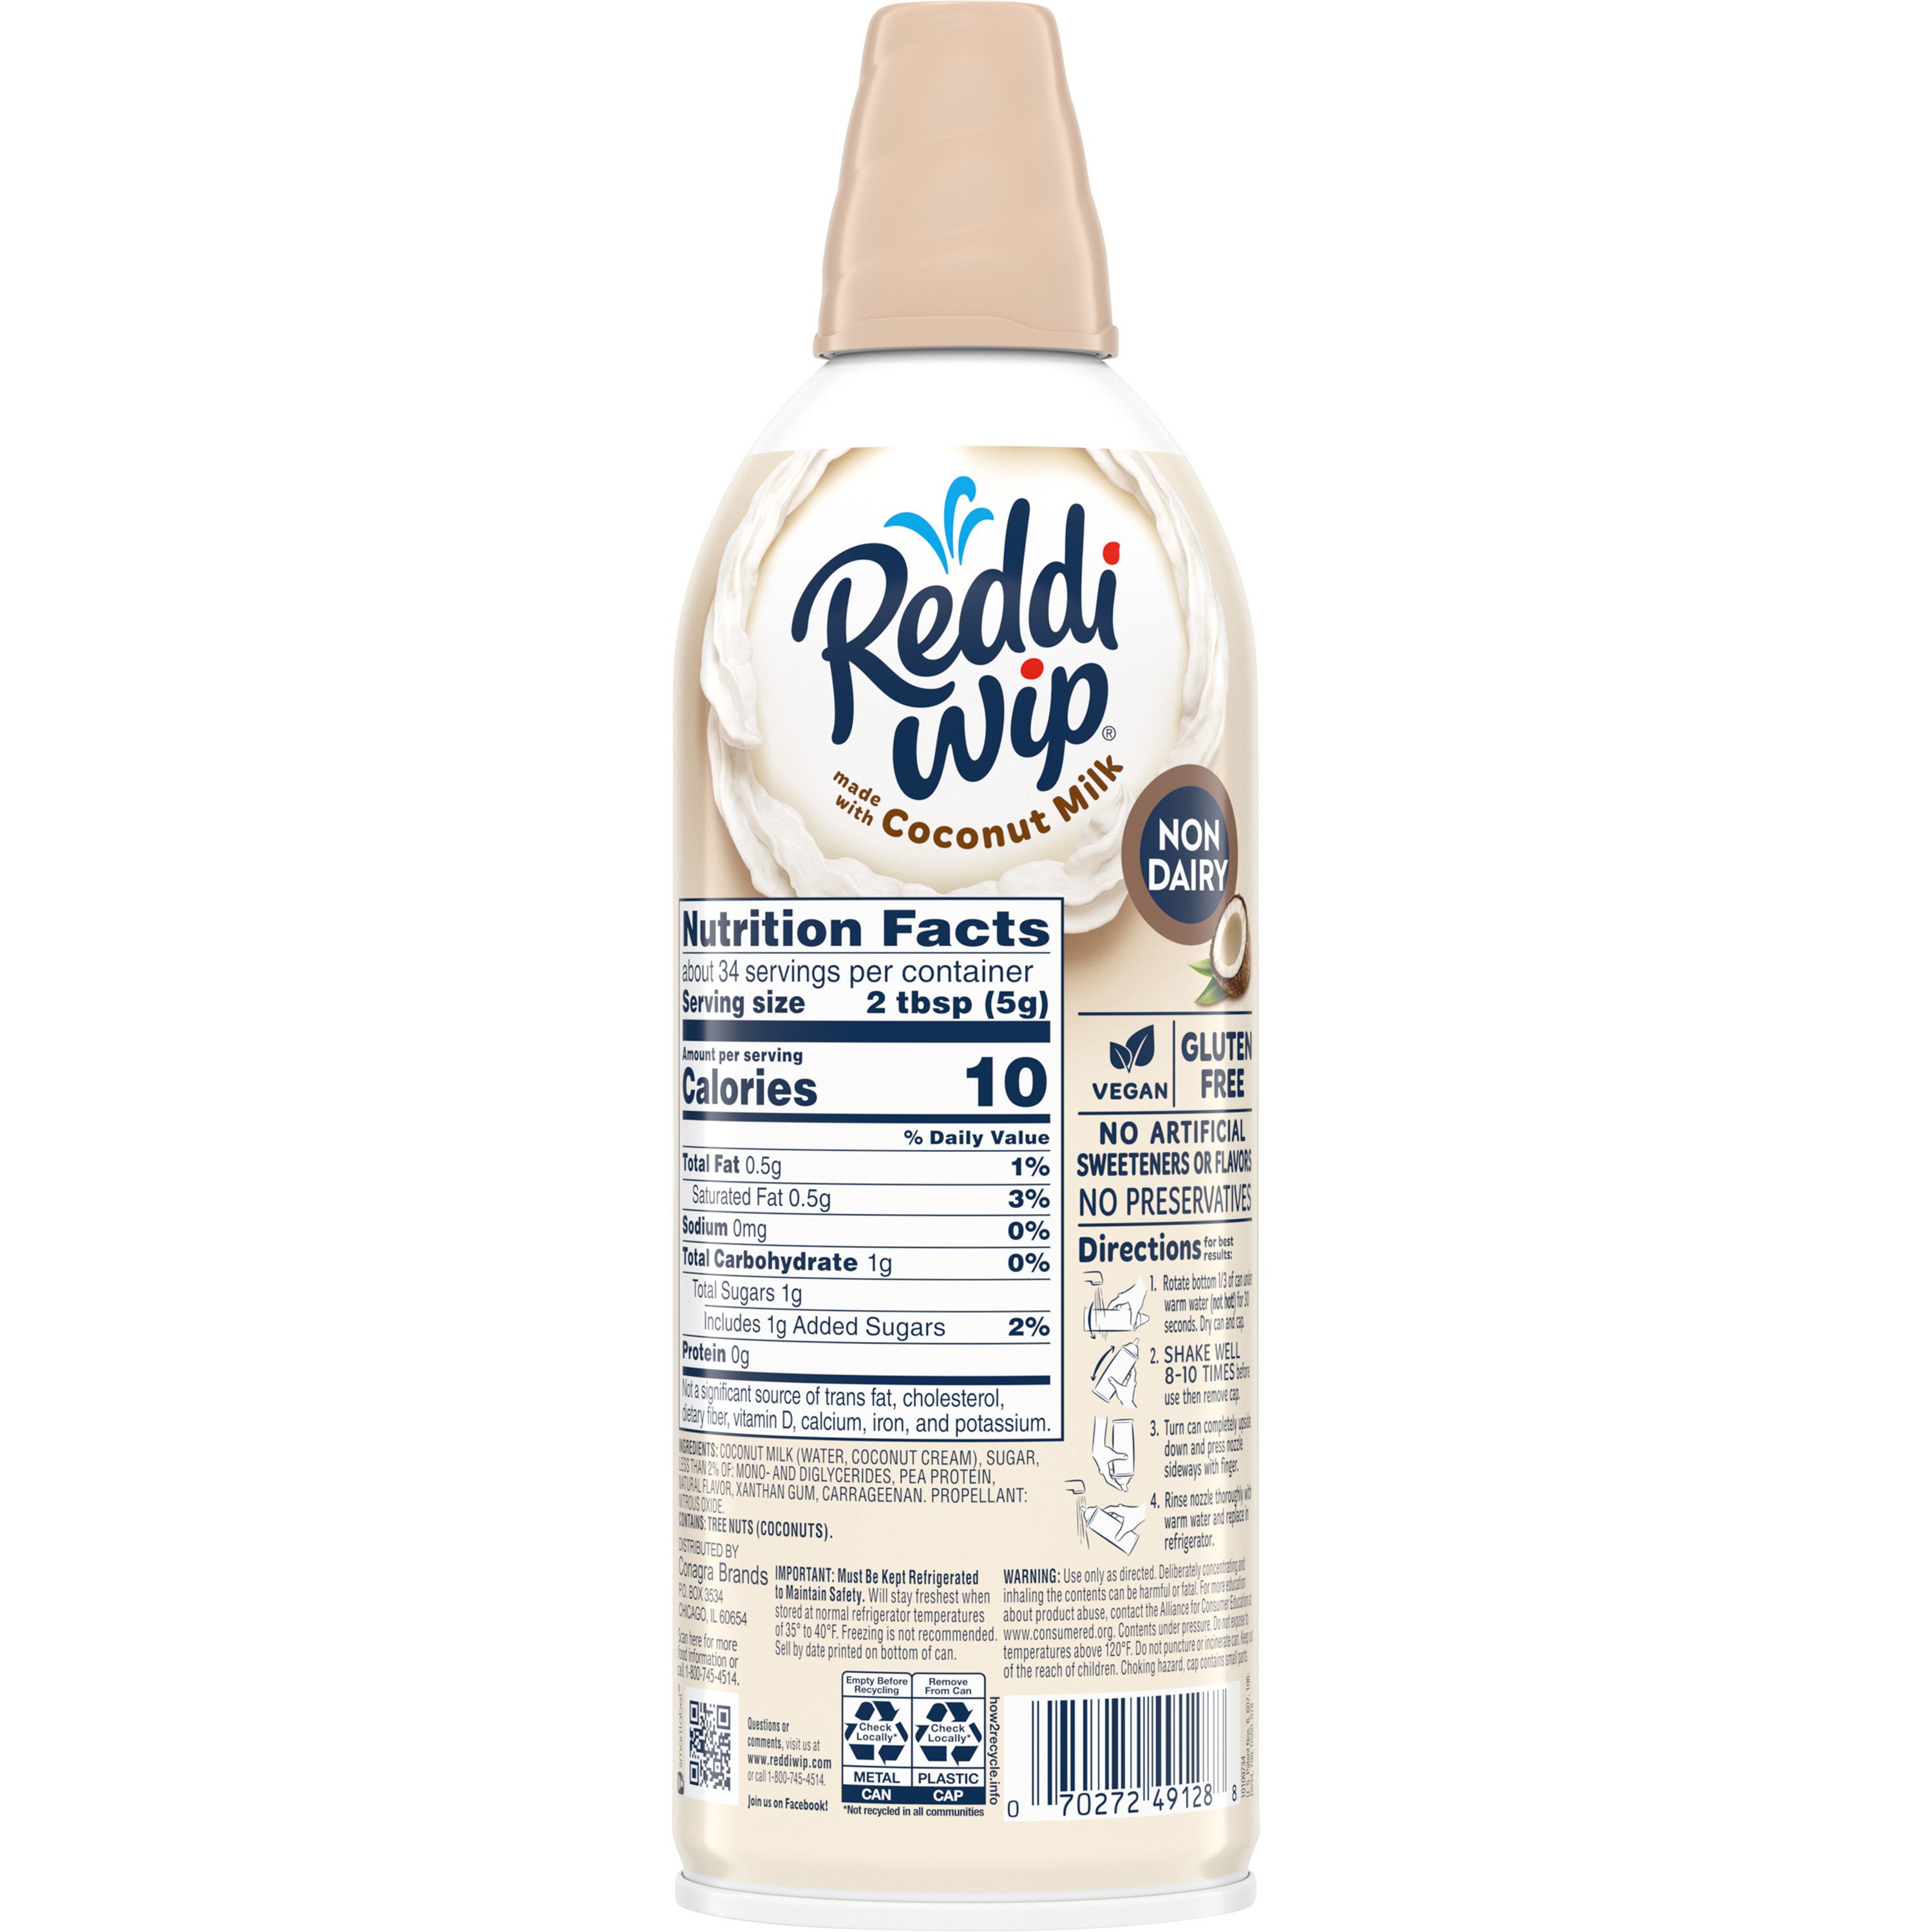 Reddi Wip Non Dairy Vegan Whipped Topping Made with Coconut Milk